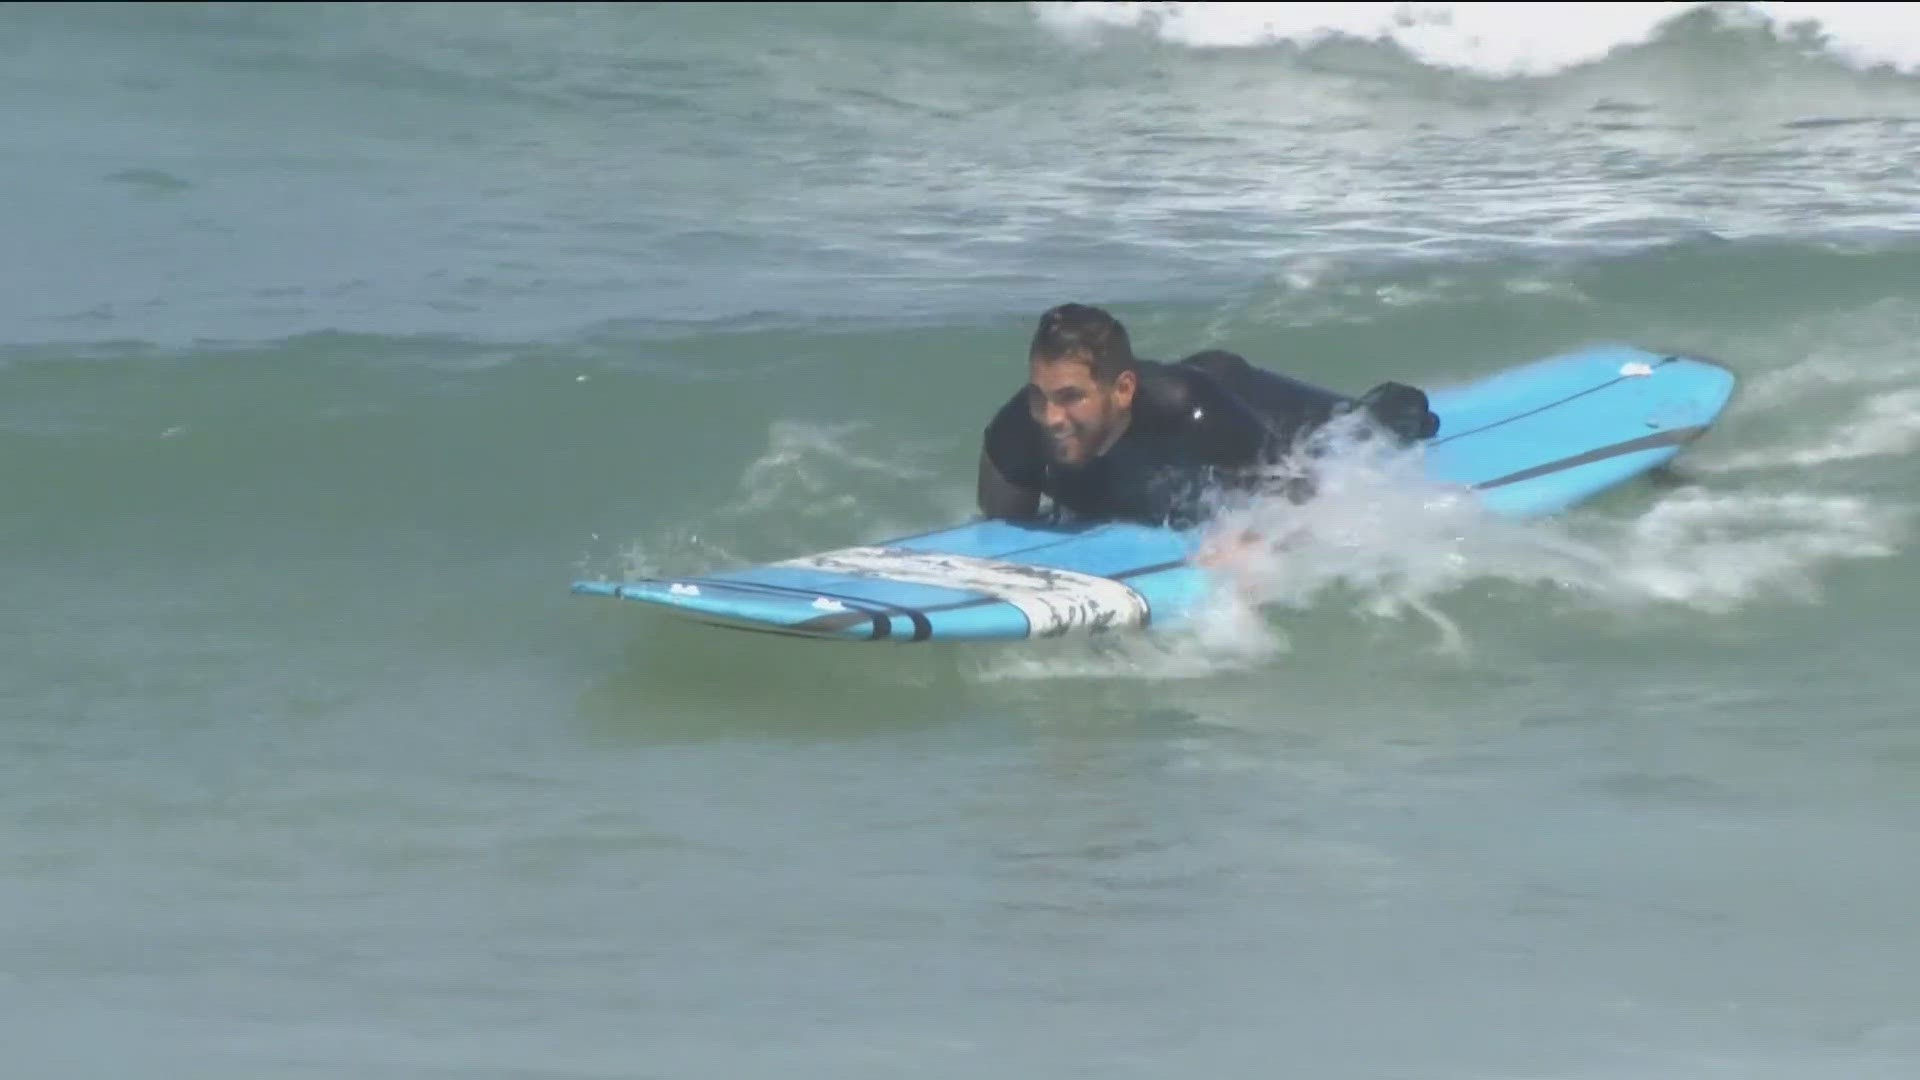 100 sufers are taking part in the U.S. Open Adaptive Surfing Championships.